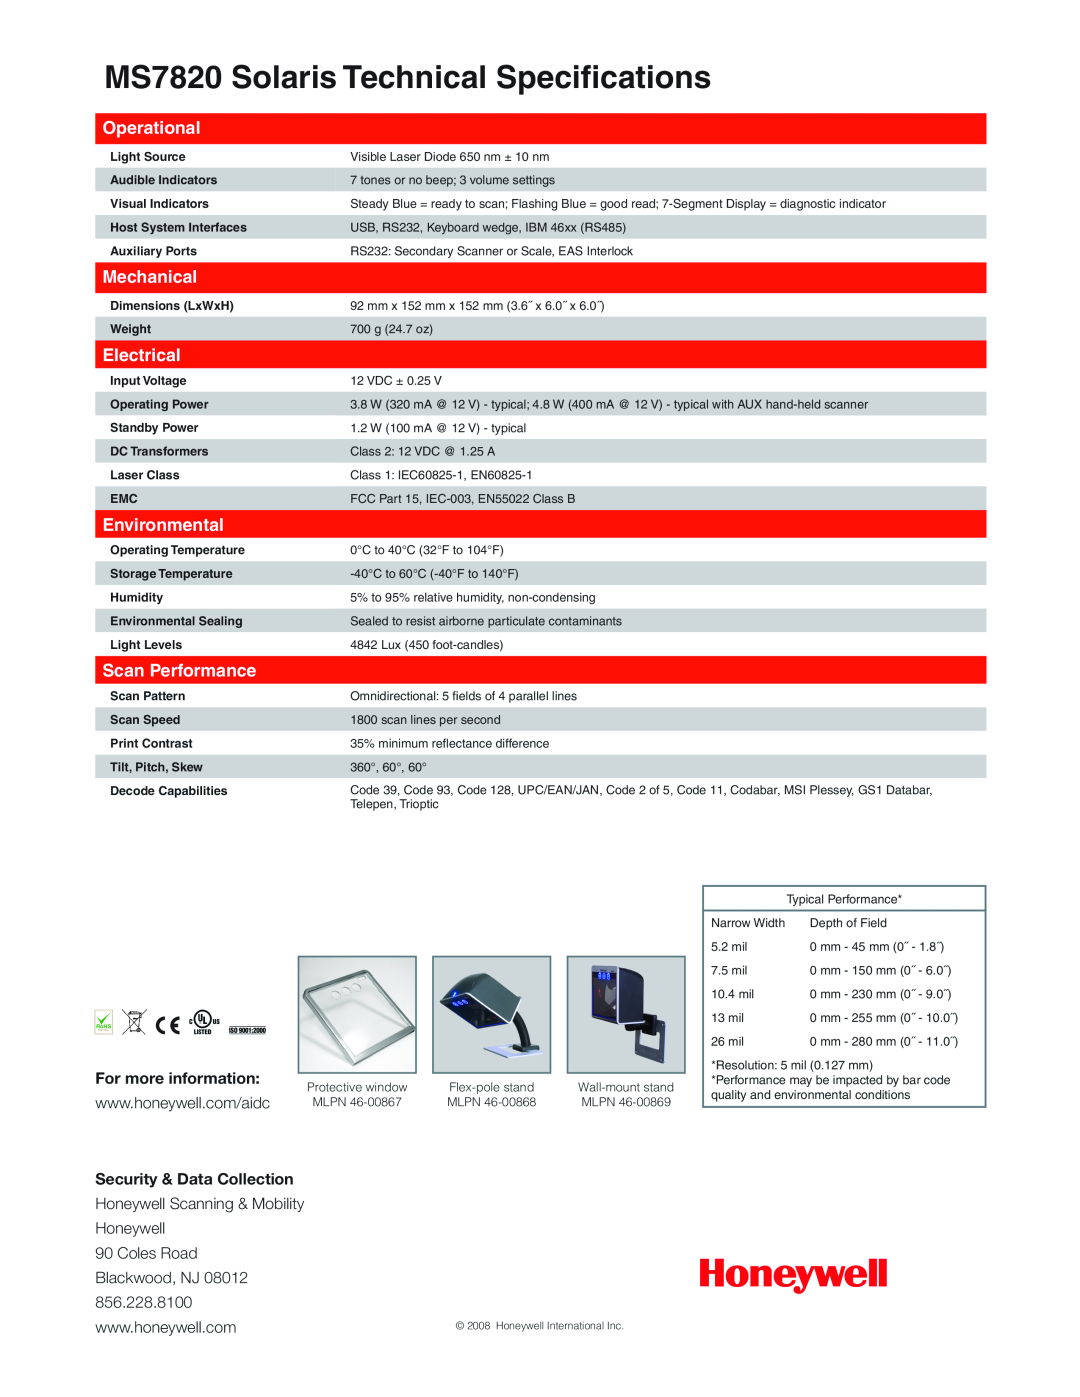 Metrologic Instruments MS7820 Solaris Technical Specifications, Operational, Mechanical, Electrical, Environmental 